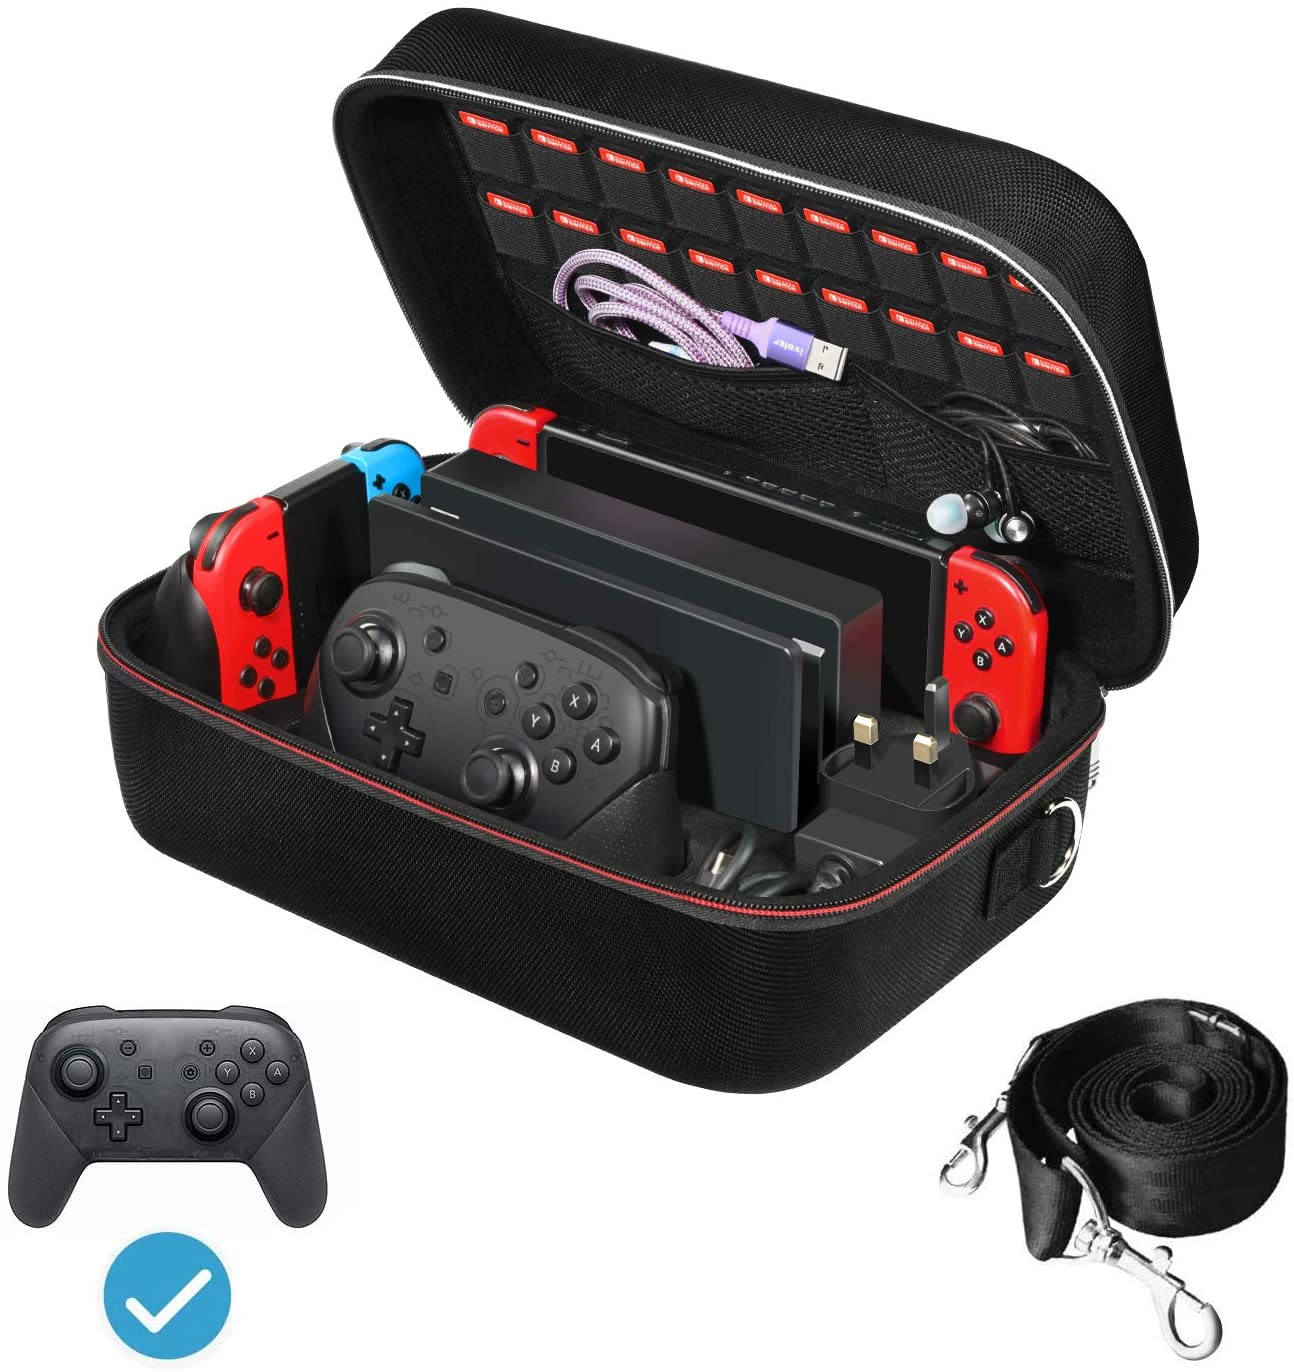 iVoler Carrying Storage Case for Nintendo Switch/Switch OLED